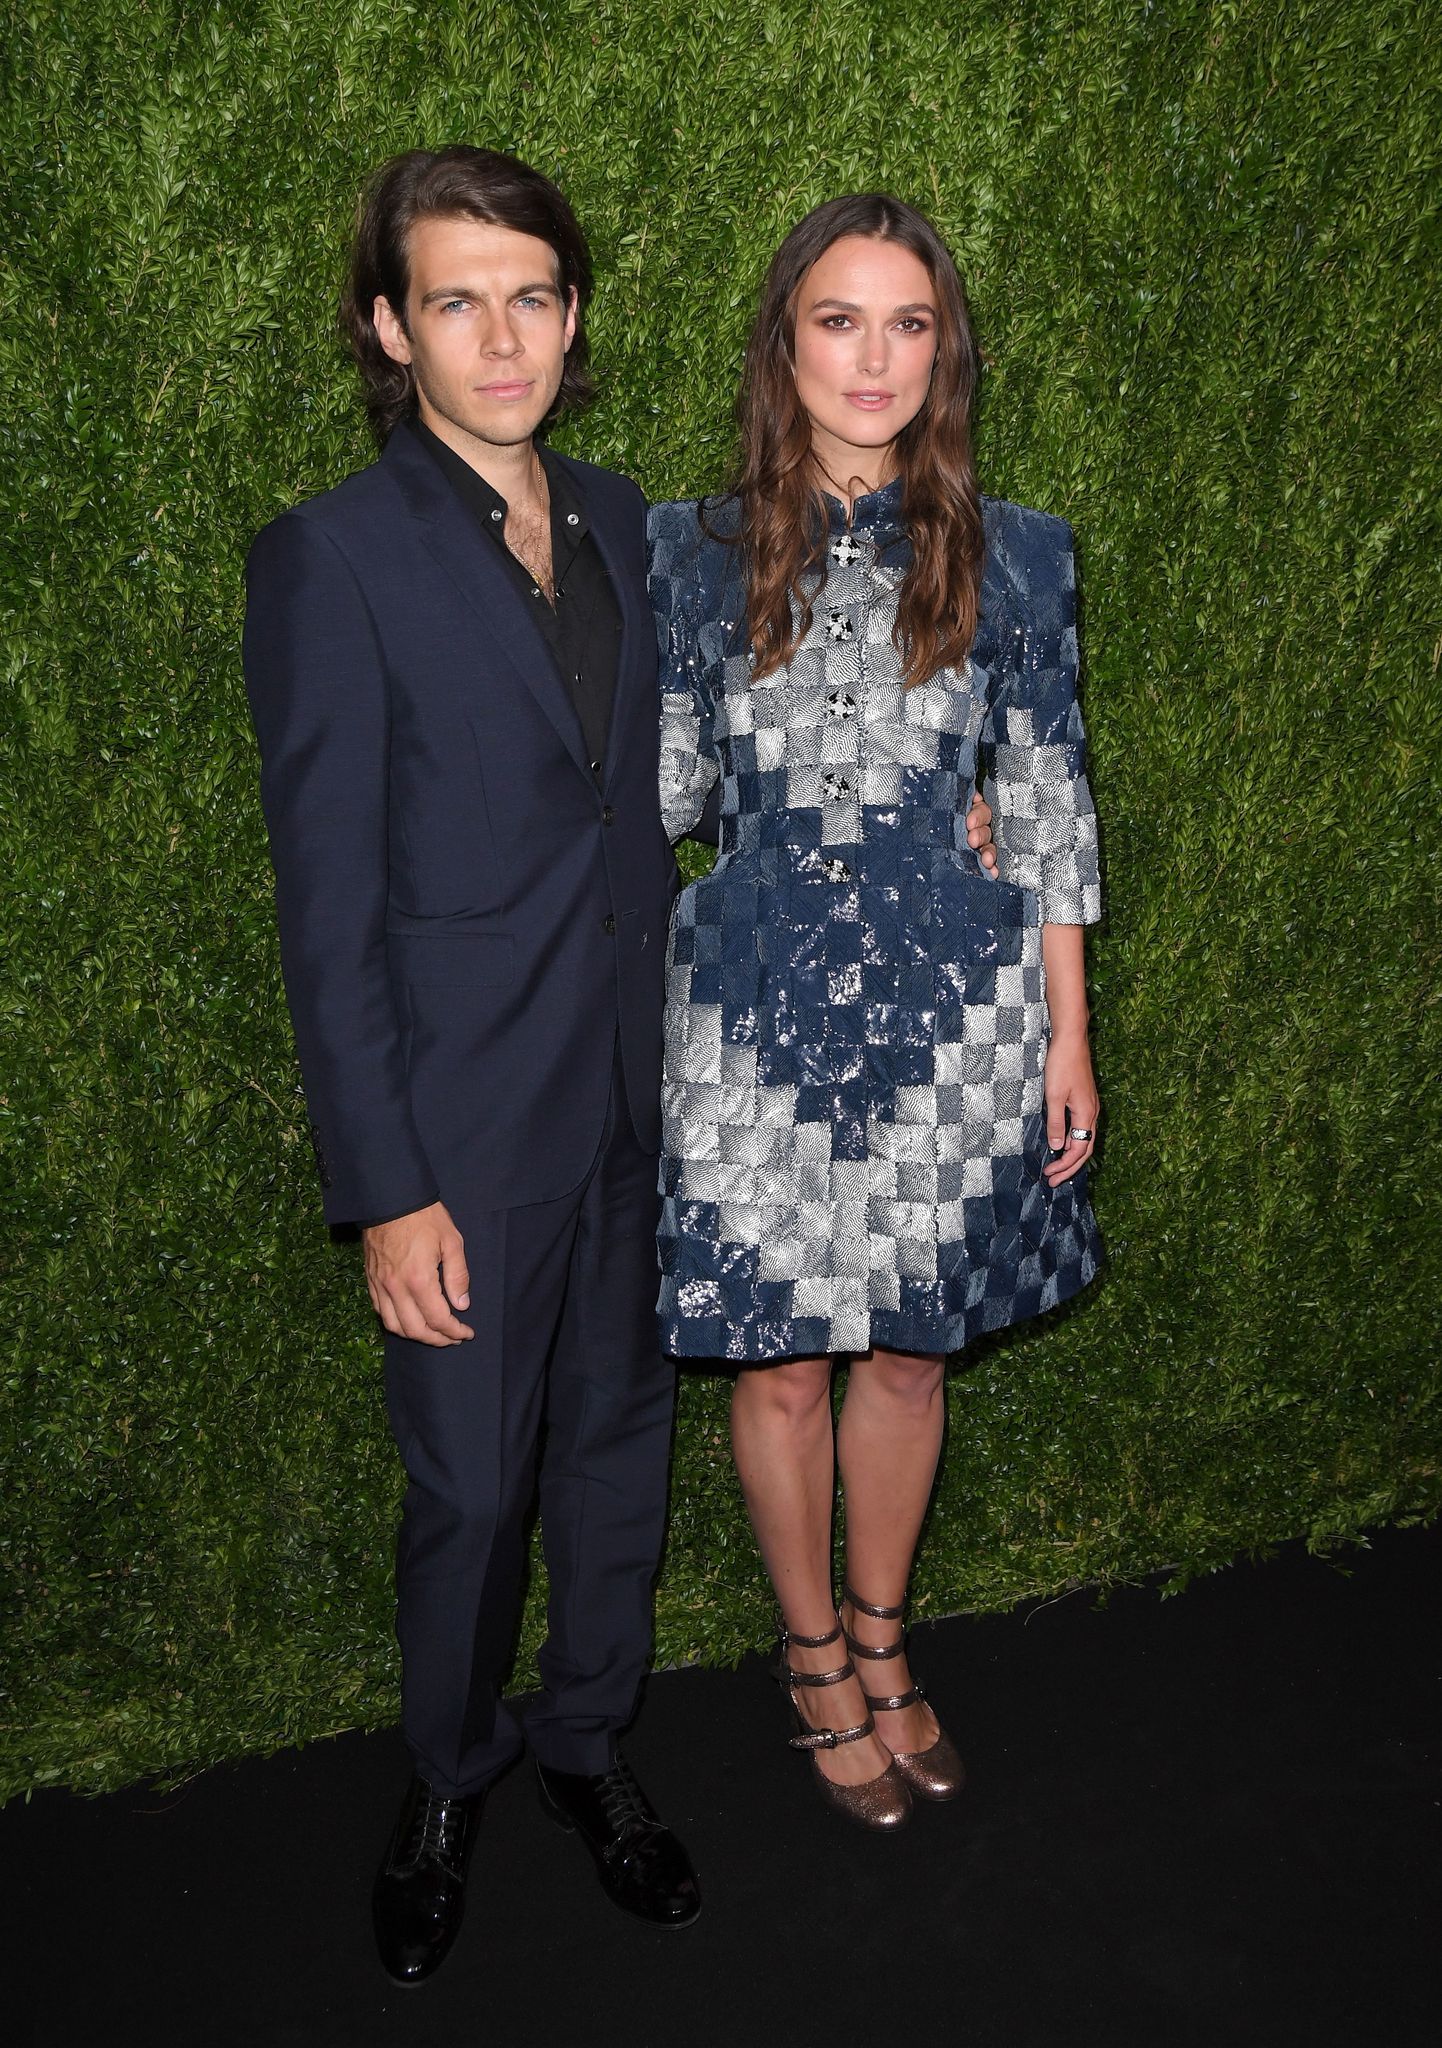 Keira Knightley and James Righton at the Chanel Fine Jewelry Dinner in 2016 in New York | Source: Getty Images